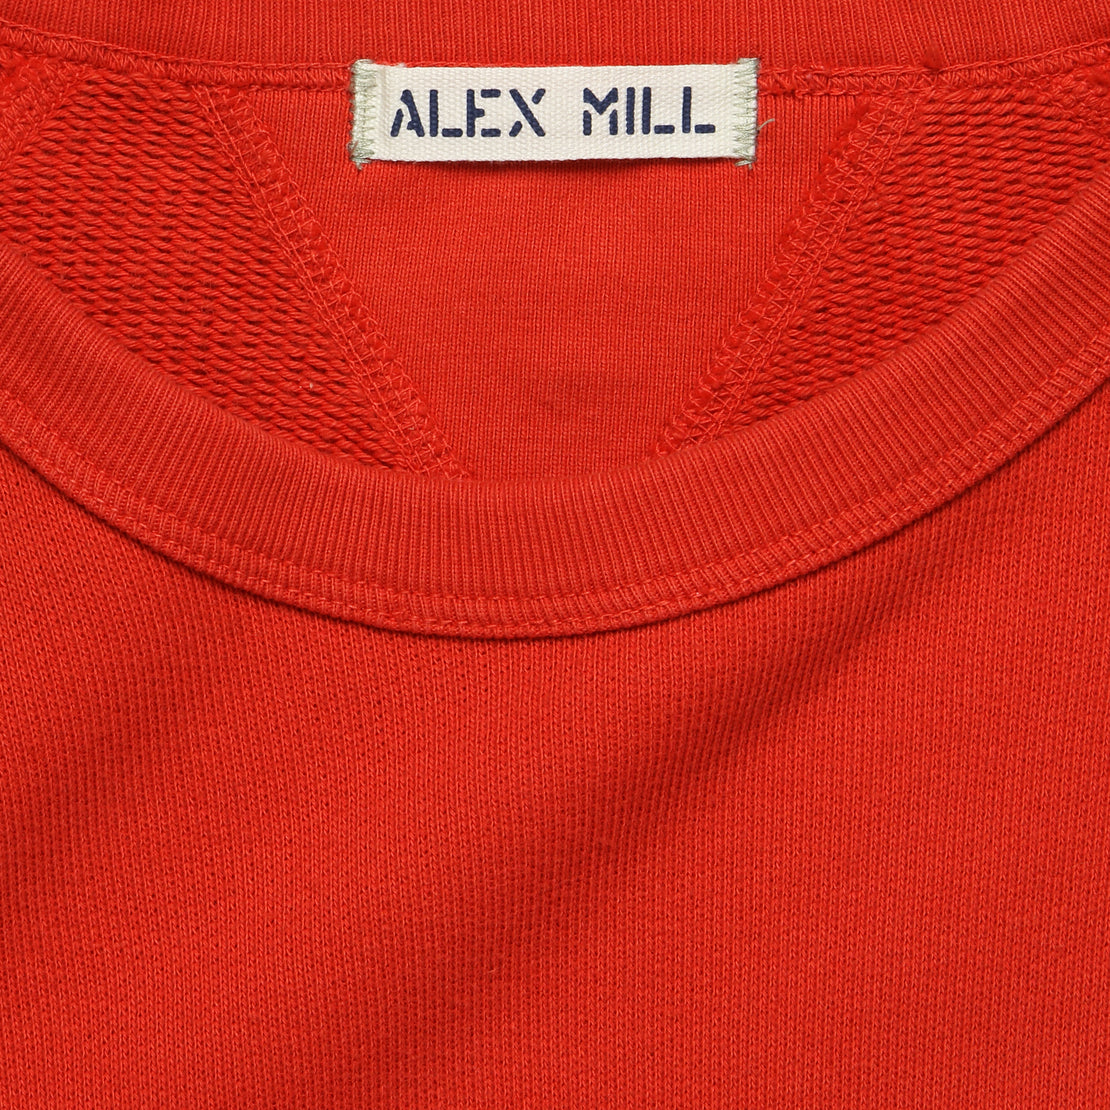 French Terry Sweatshirt - Berry Red - Alex Mill - STAG Provisions - Tops - Fleece / Sweatshirt